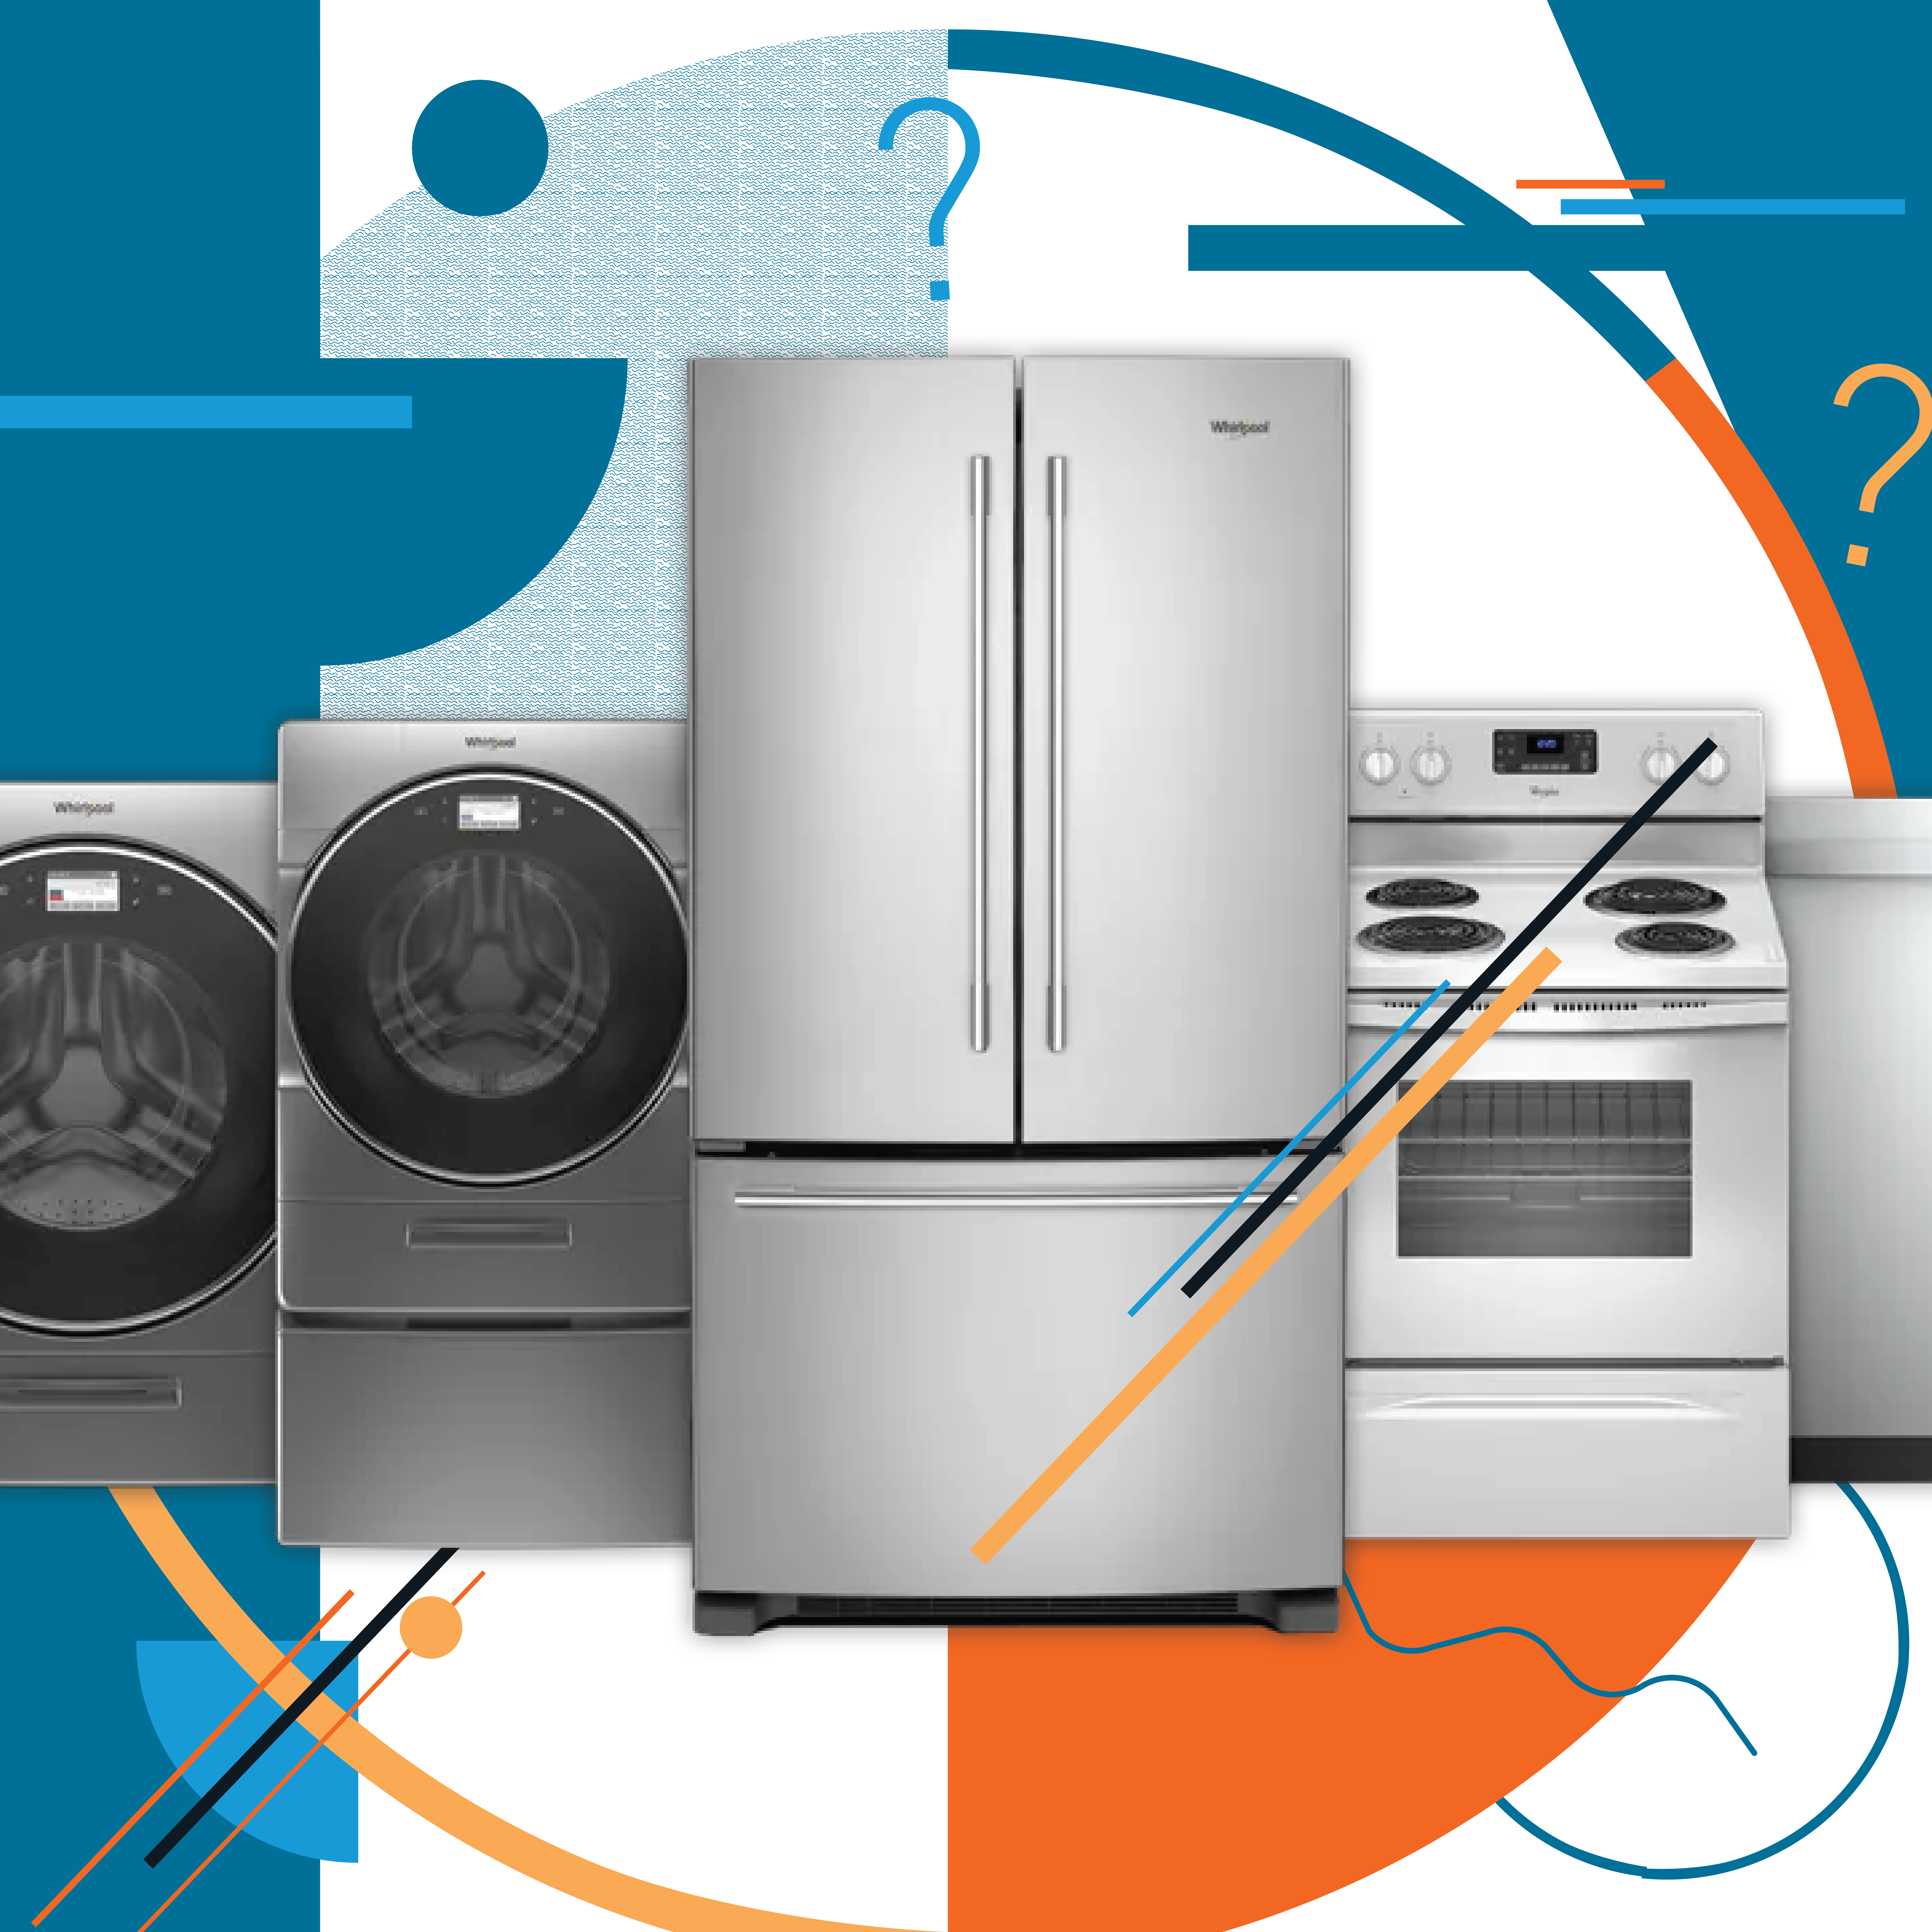 Large household appliances with blue and orange abstract shapes in the background